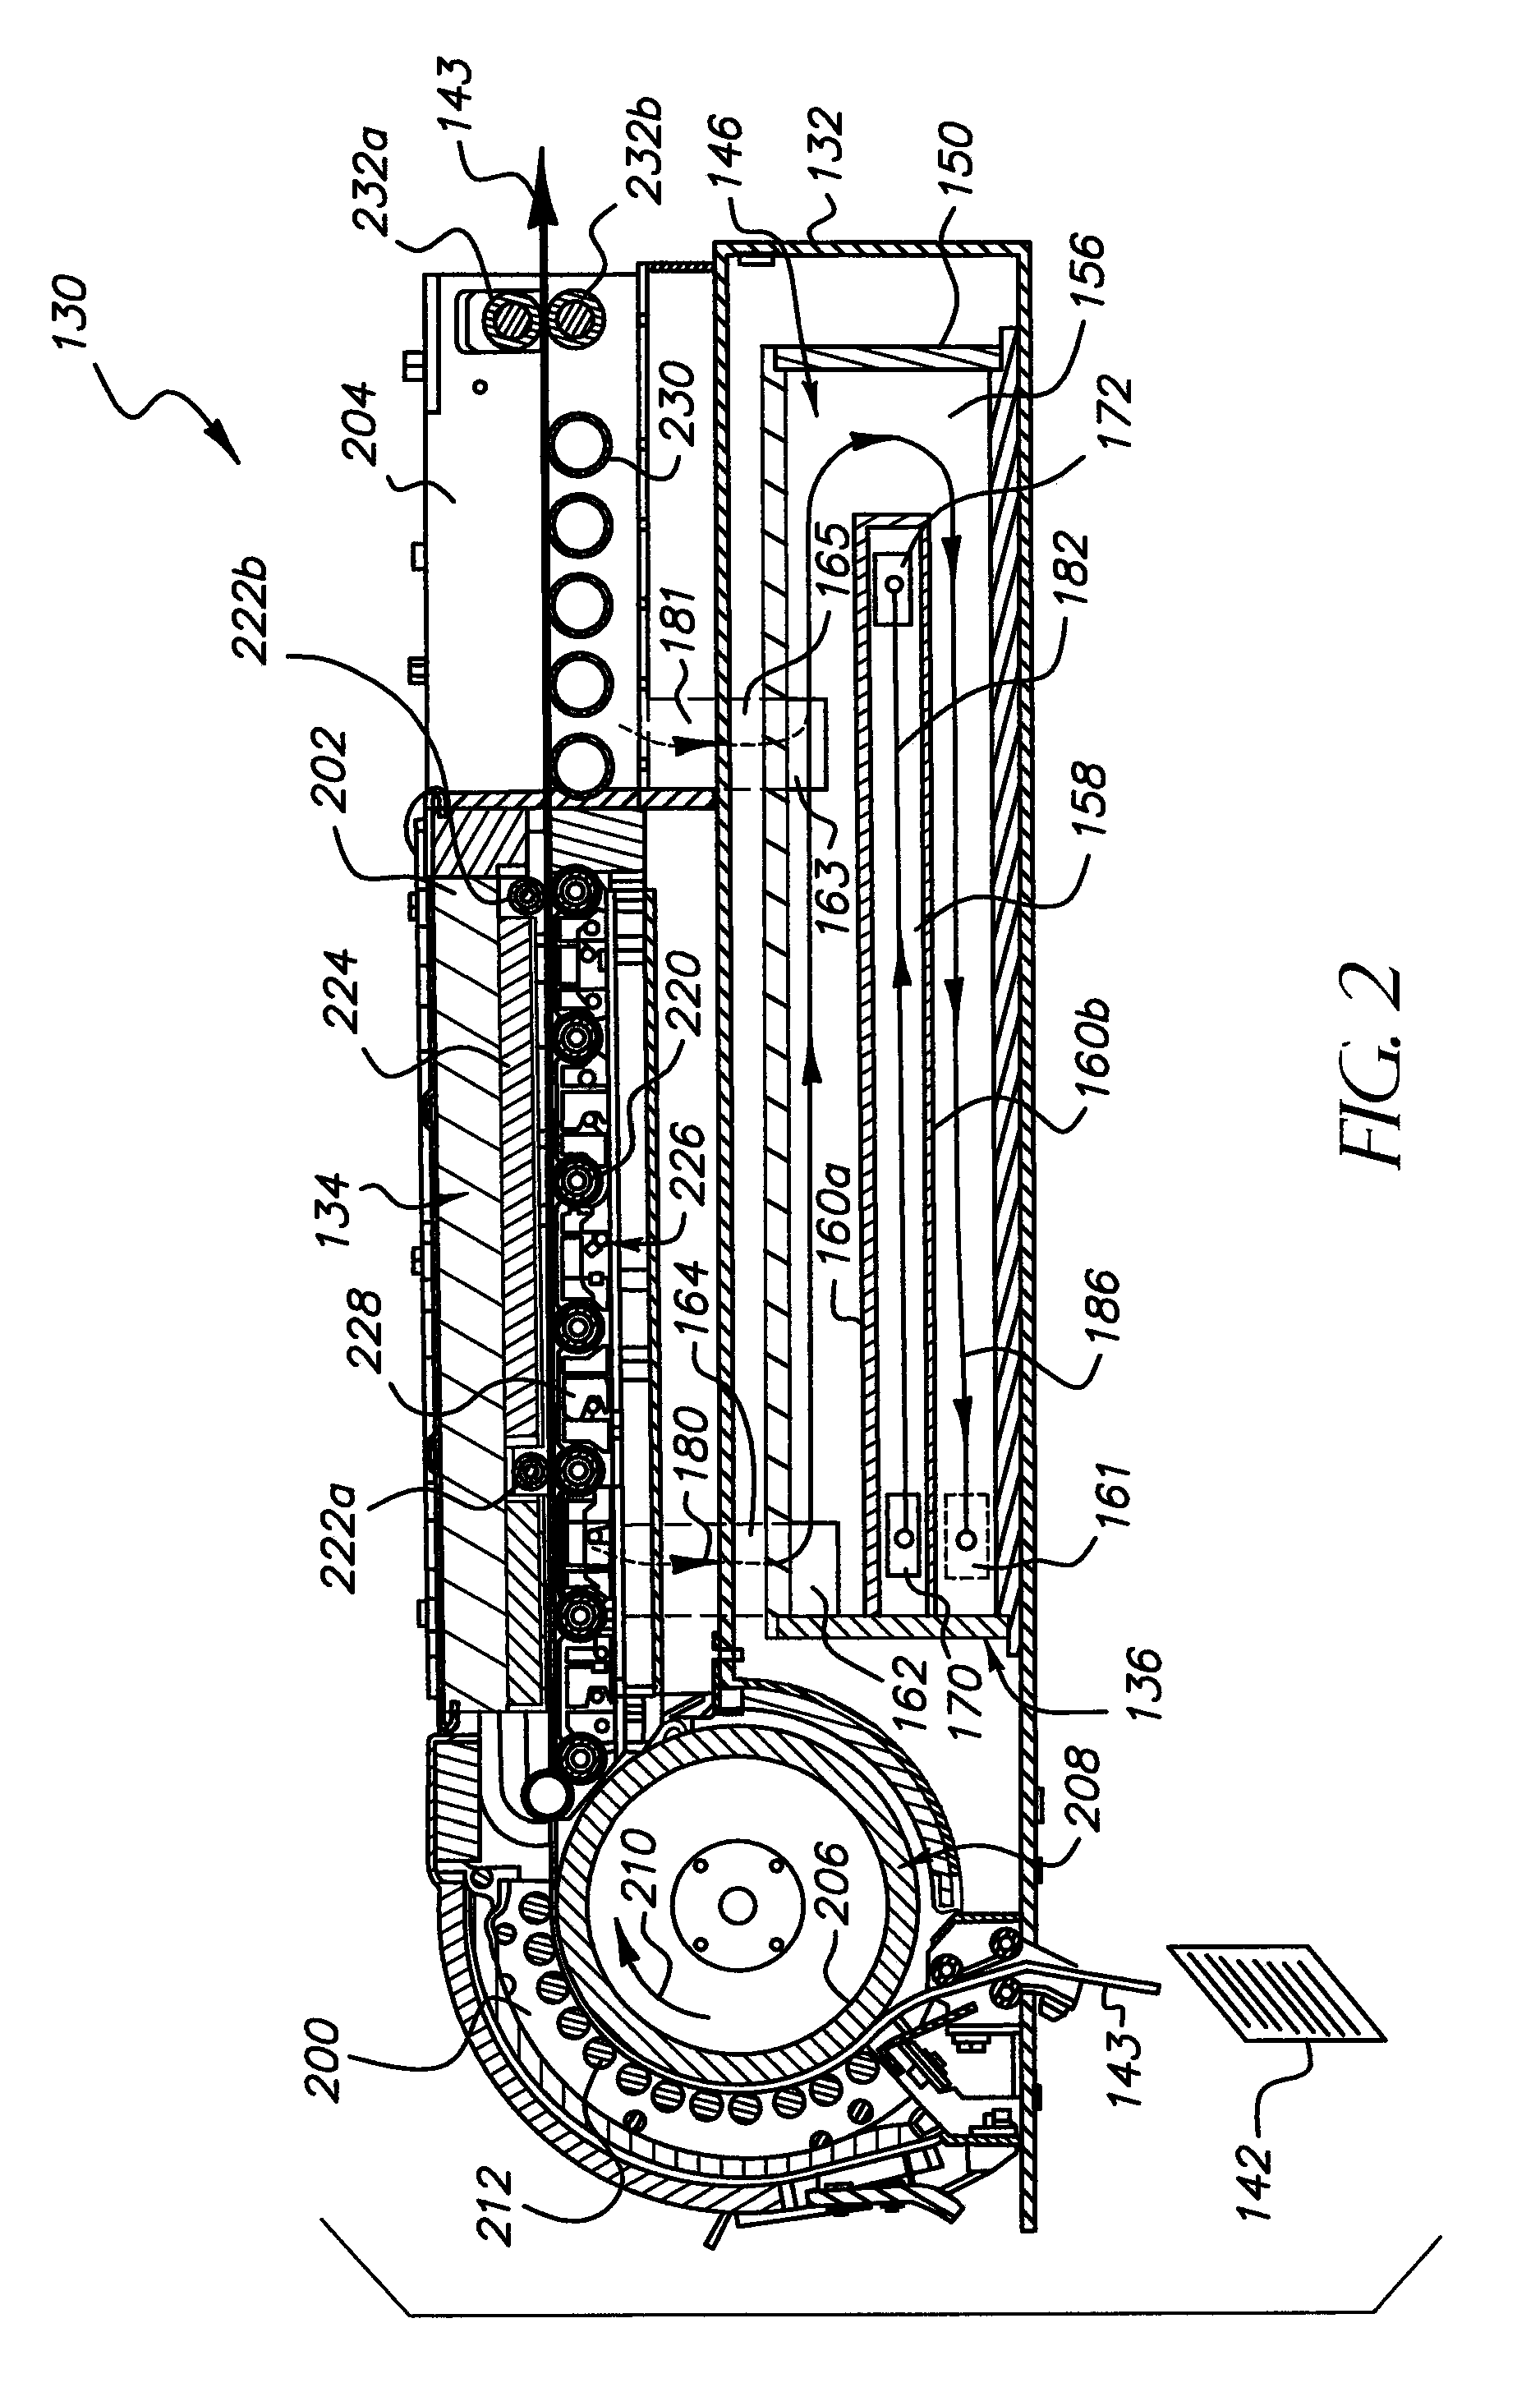 Thermal processor with contaminant removal cartridge